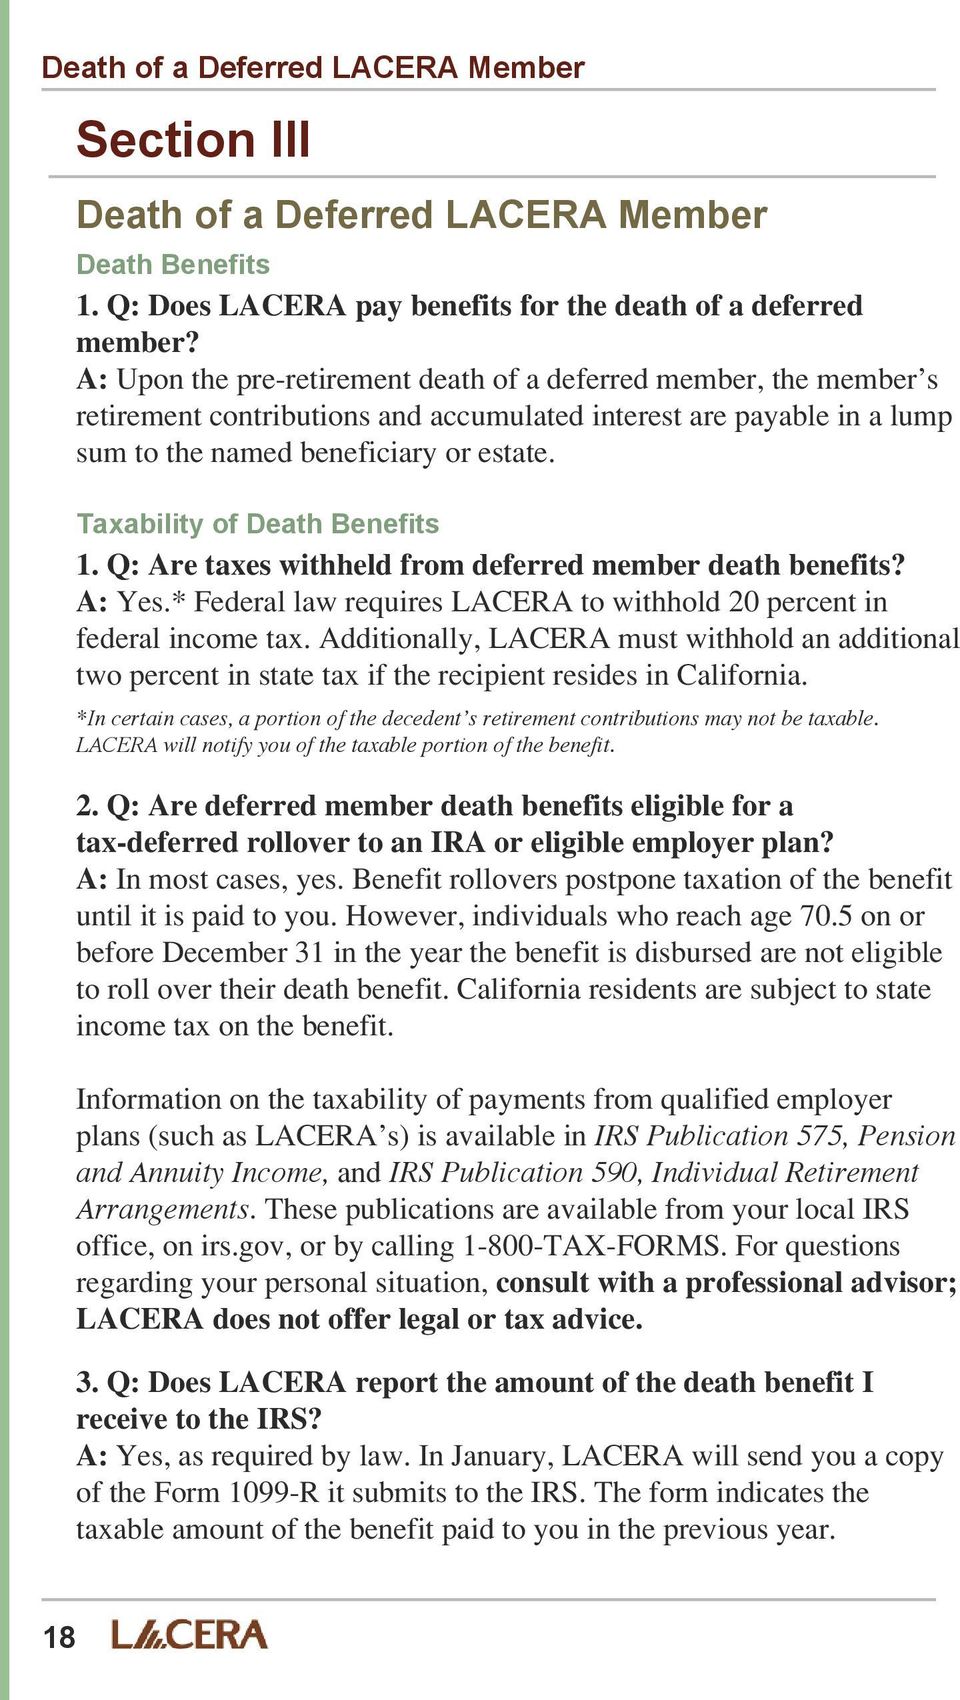 Taxability of Death Benefits 1. Q: Are taxes withheld from deferred member death benefits? A: Yes.* Federal law requires LACERA to withhold 20 percent in federal income tax.